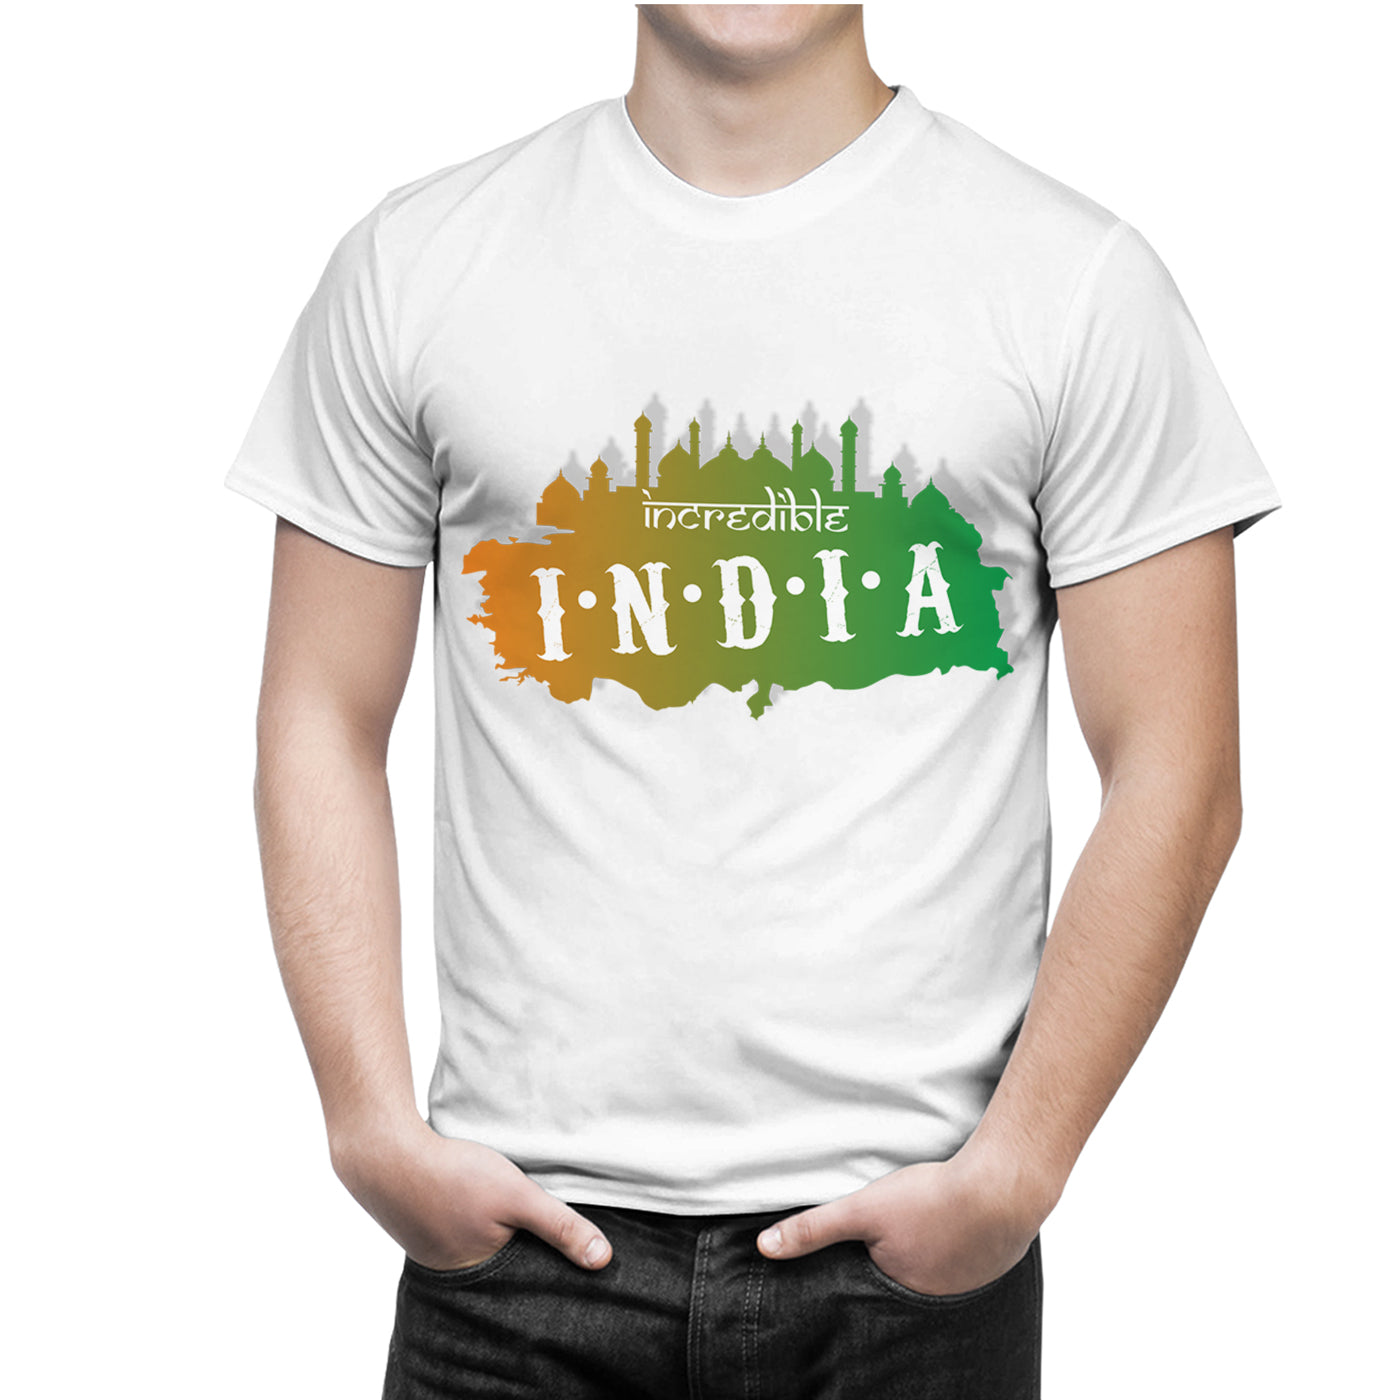 iberry's Independence day t shirt | Republic day t shirts |India t shirts |Patriotic tshirt |15 August t shirts |Round neck cotton tshirts -23